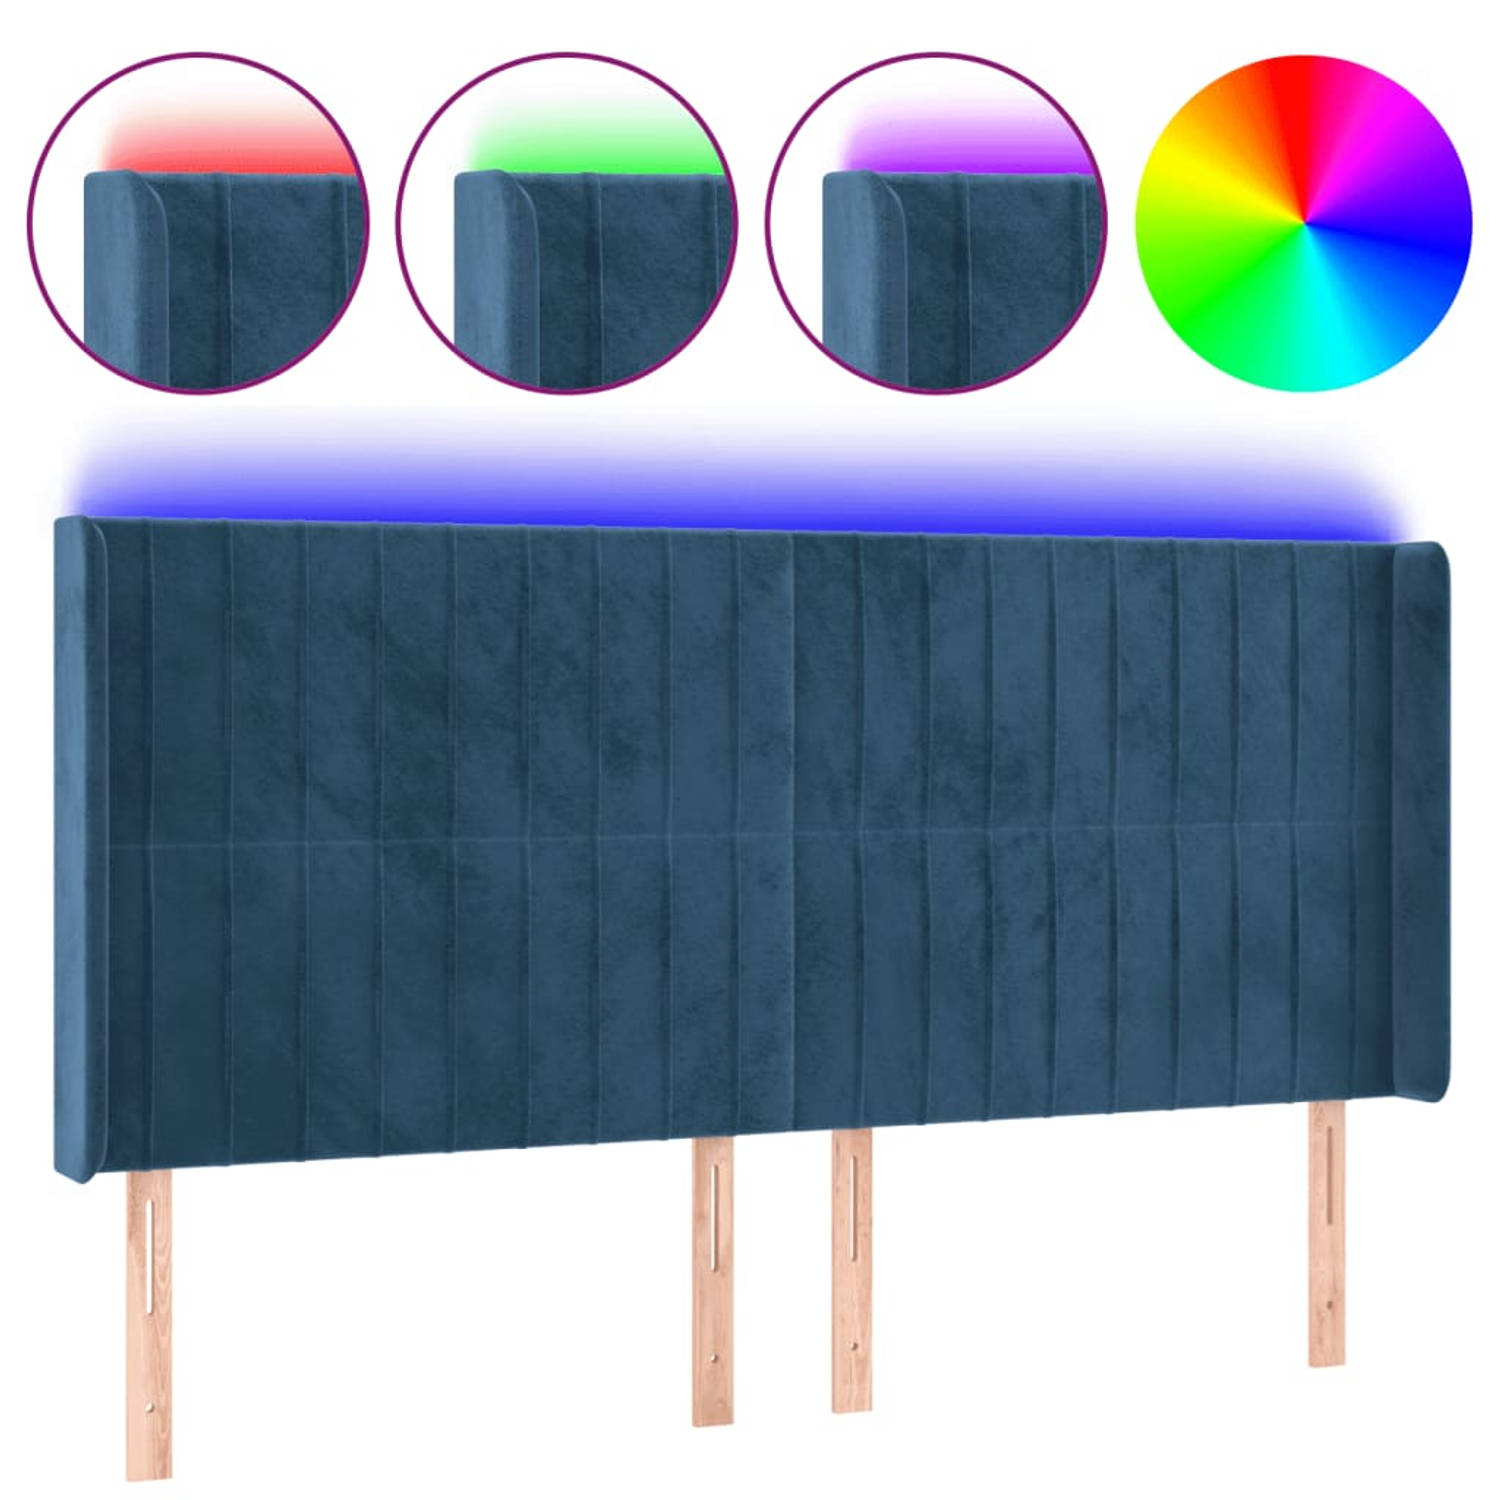 The Living Store Hoofdbord Dark Blue Velvet - 163x16x118/128cm - Adjustable Height - Comfortable Support - Cuttable LED Strip - USB Connection - Includes Manual - 2 LED Strips